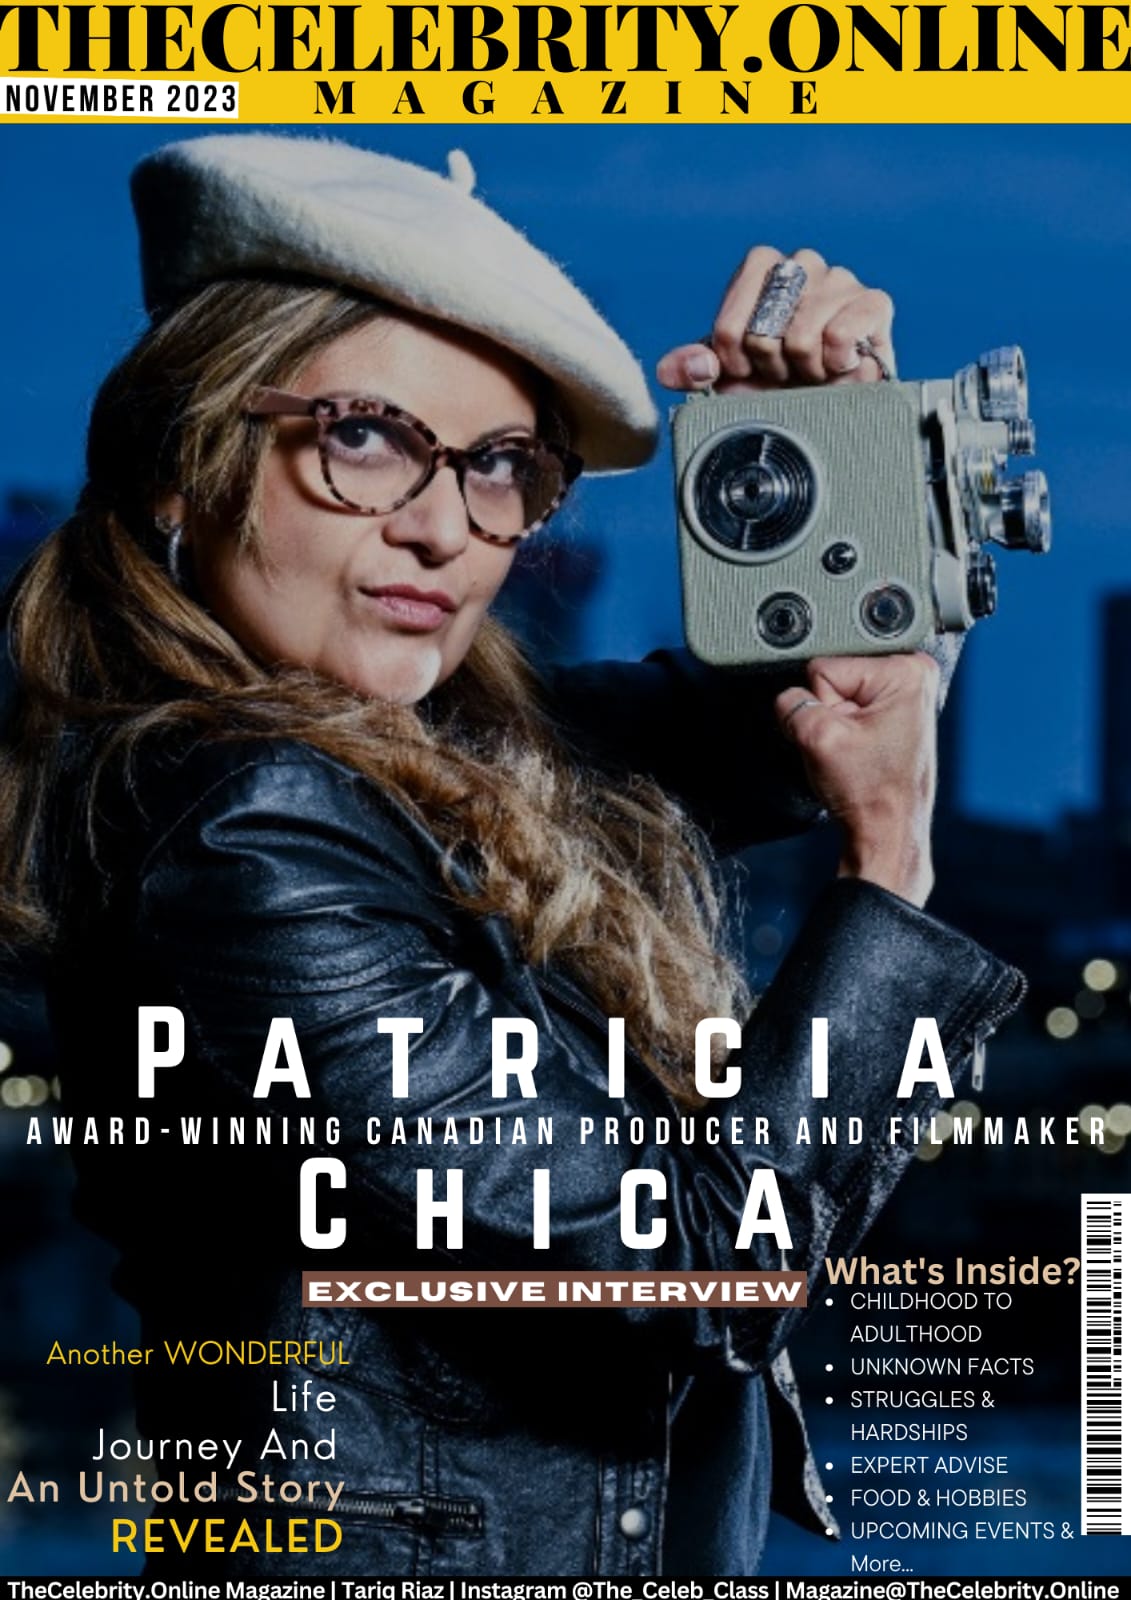 Patricia Chica Award-Winning Canadian Producer and Filmmaker – Exclusive Interview